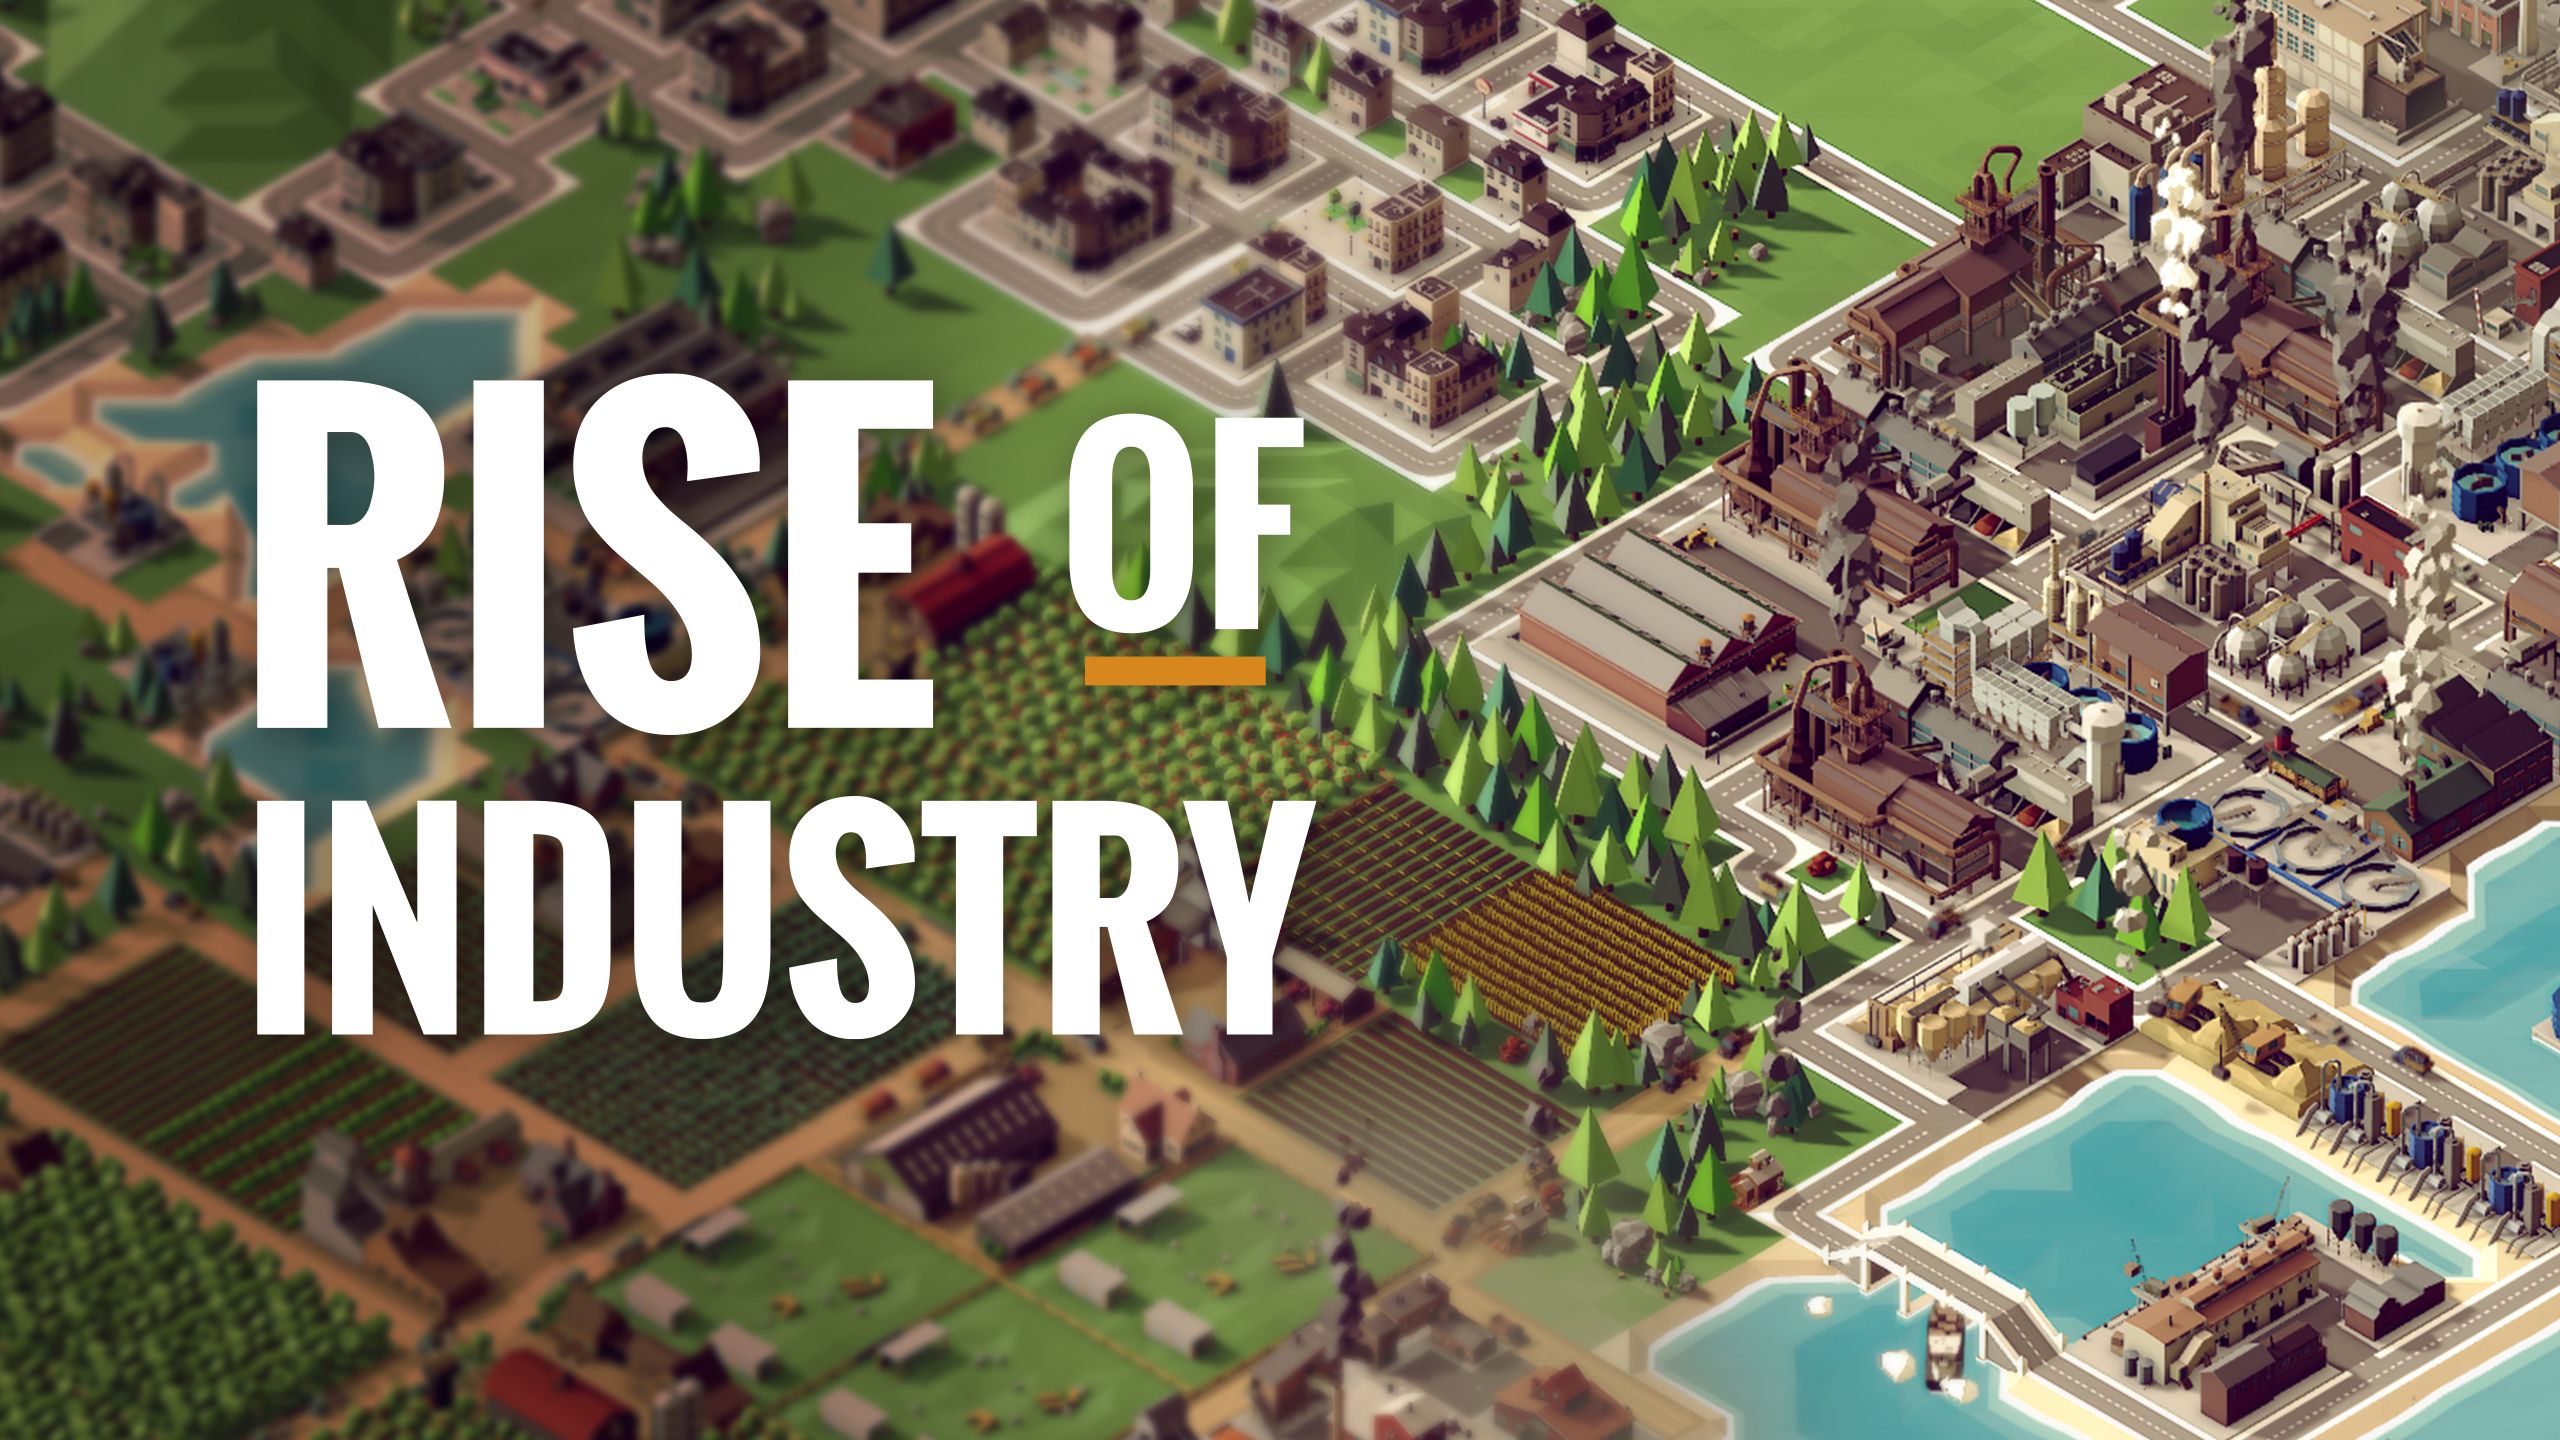 Grab Rise of Industry for free at Epic until March 9th